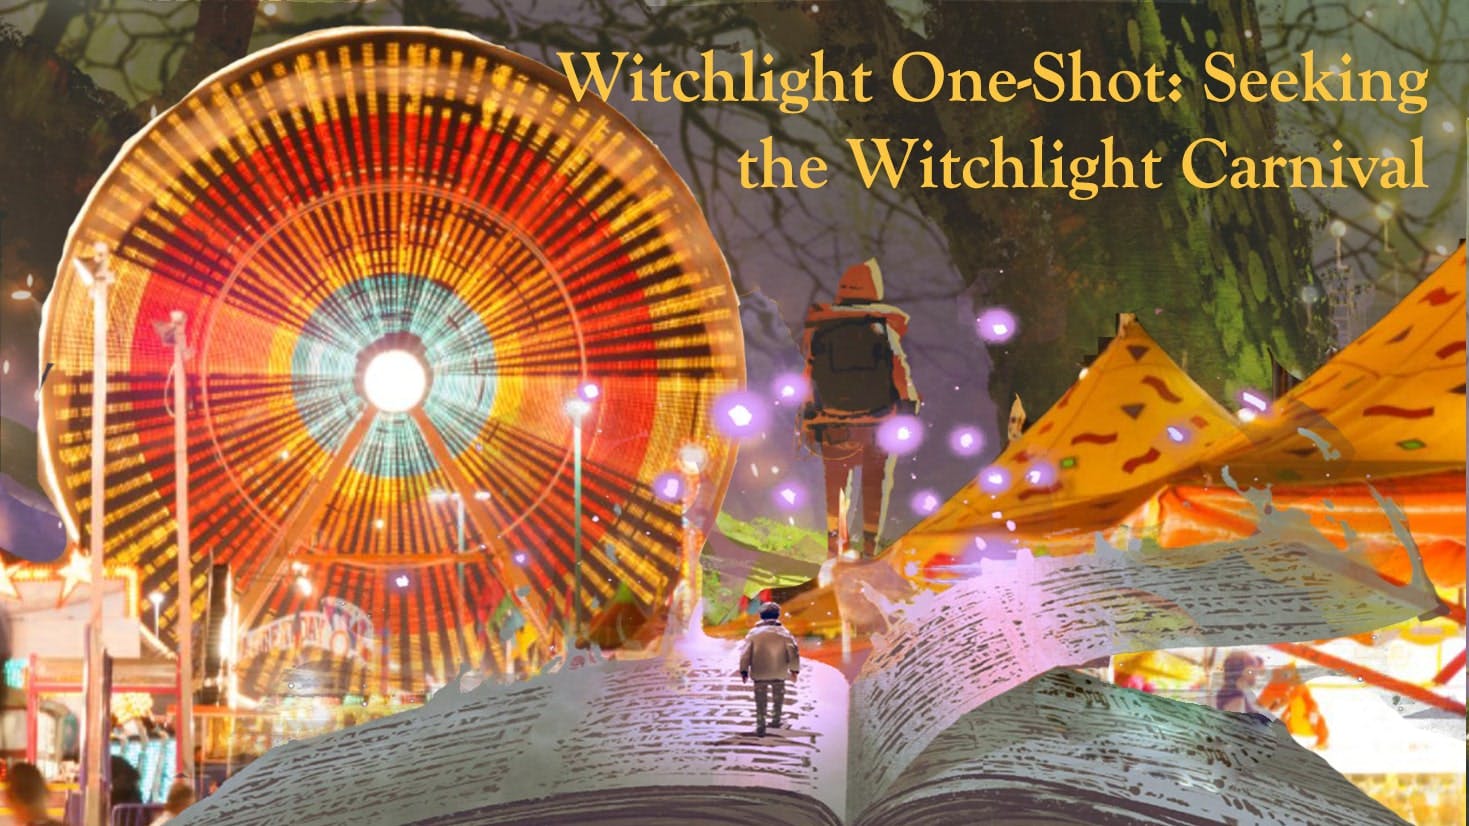 Witchlight One-Shot: Seeking the Witchlight Carnival